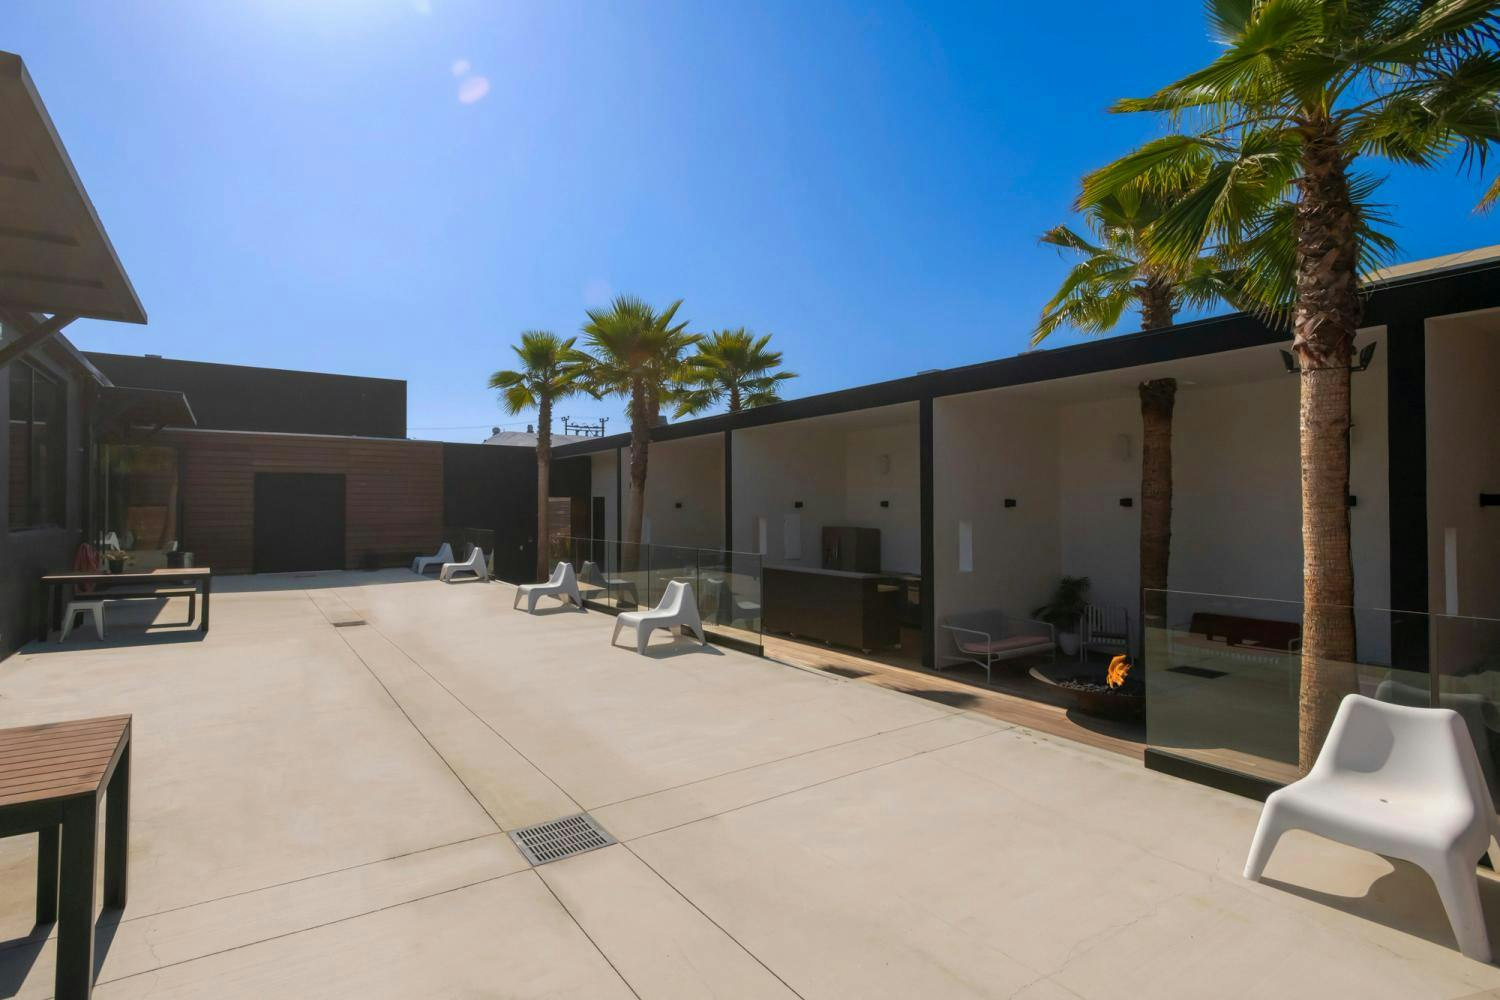 A modern outdoor patio area with stylish seating, surrounded by sleek architectural elements and palm trees.